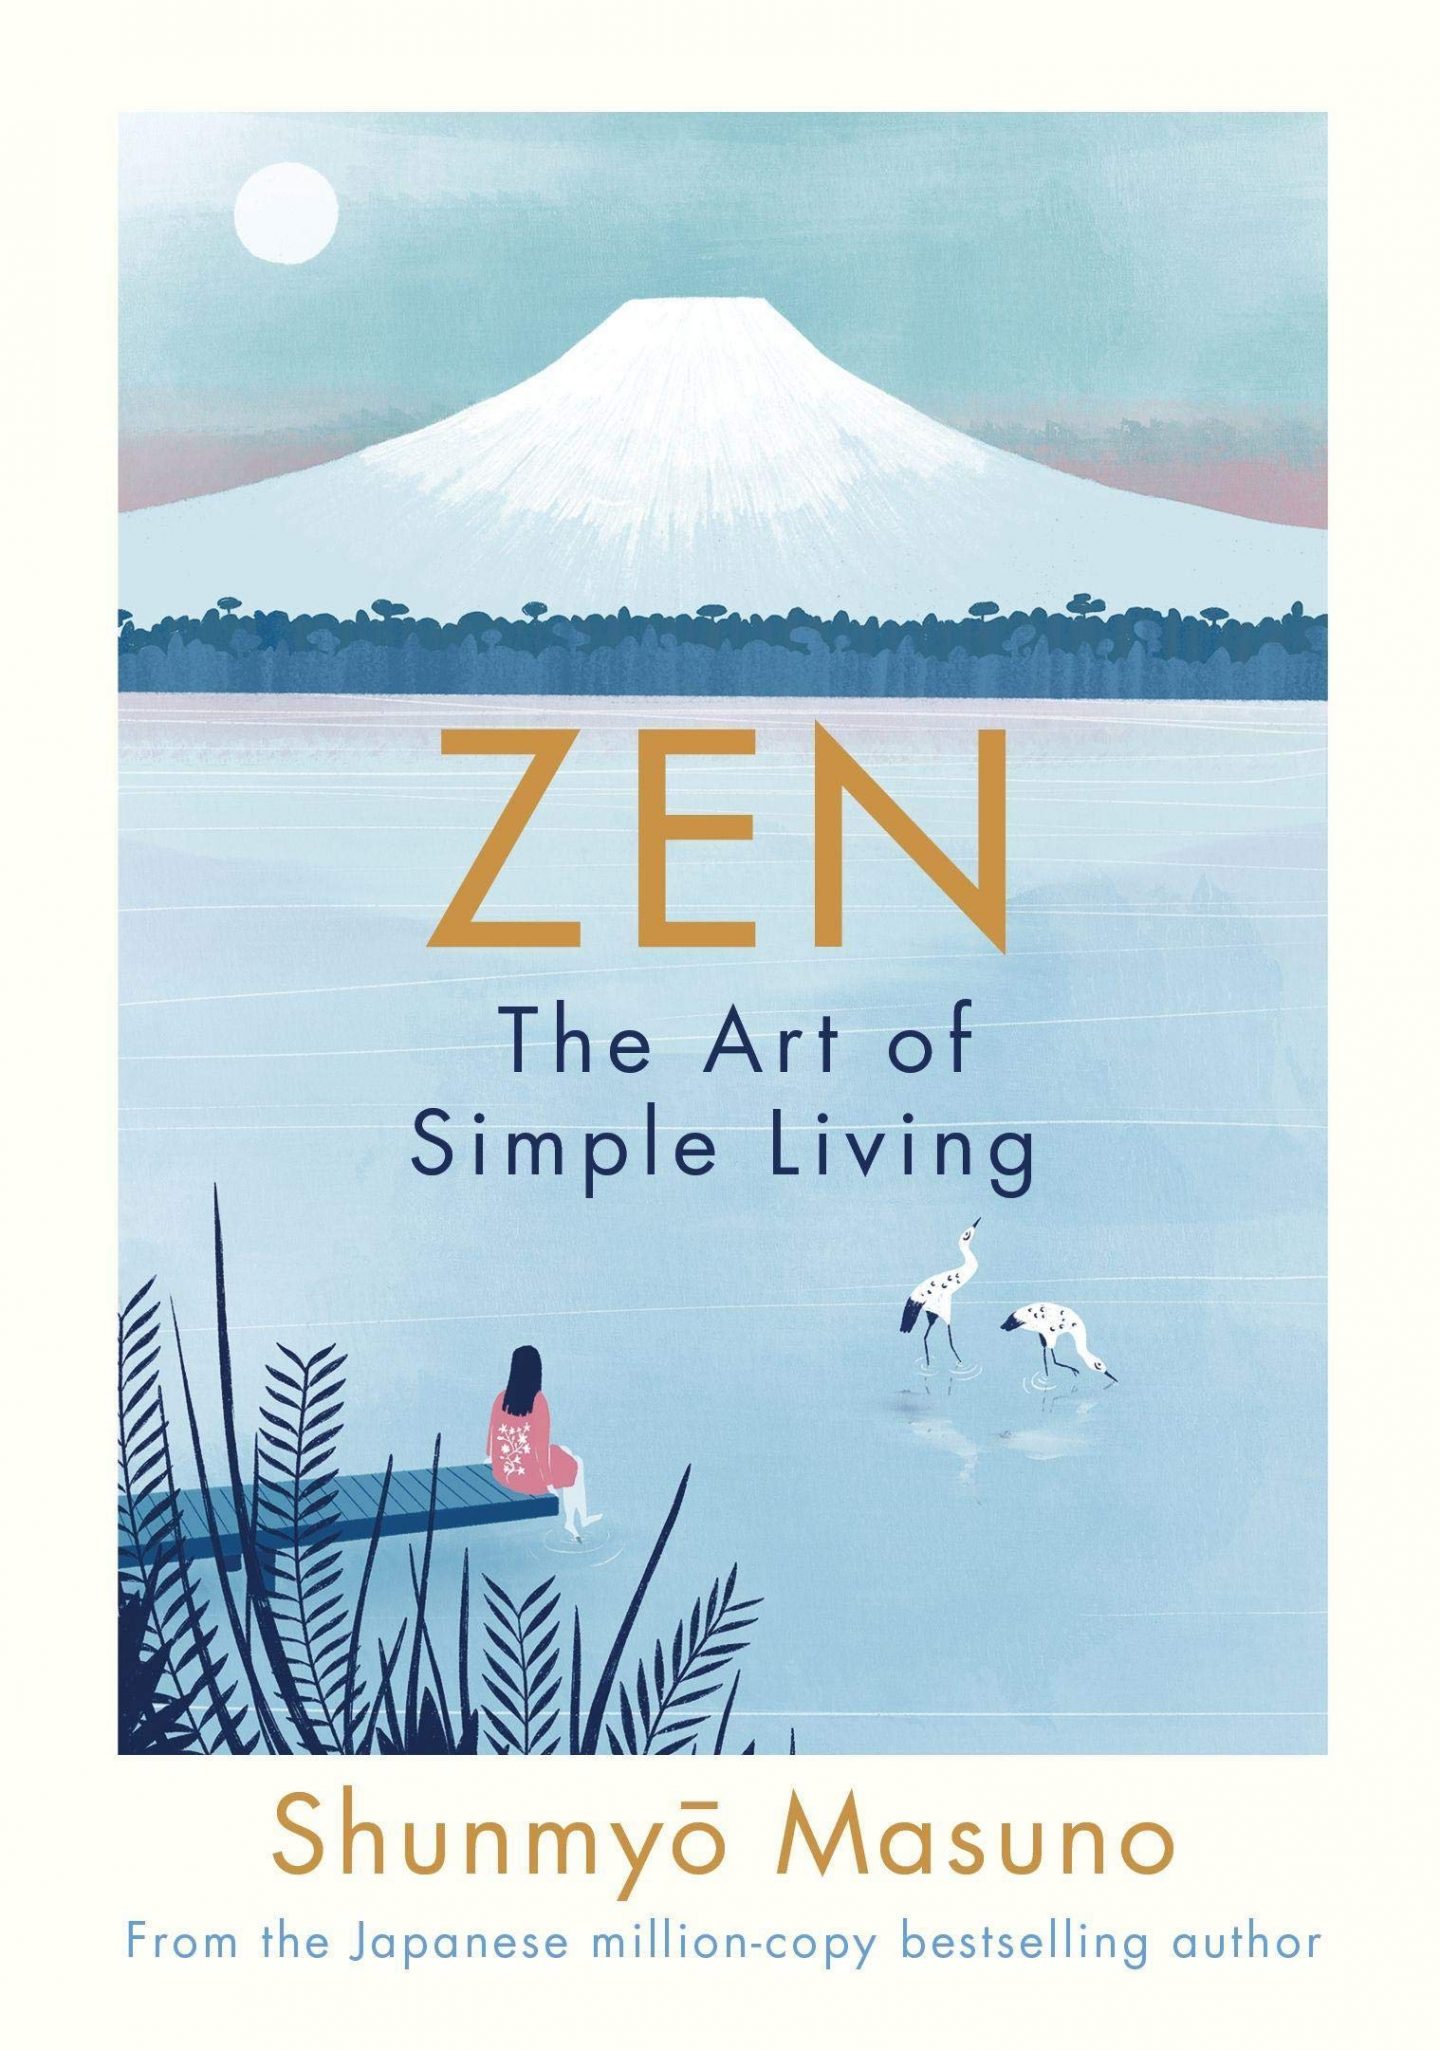 The book cover for Zen The Art Of Simple Living by Shunmyo Masuno.